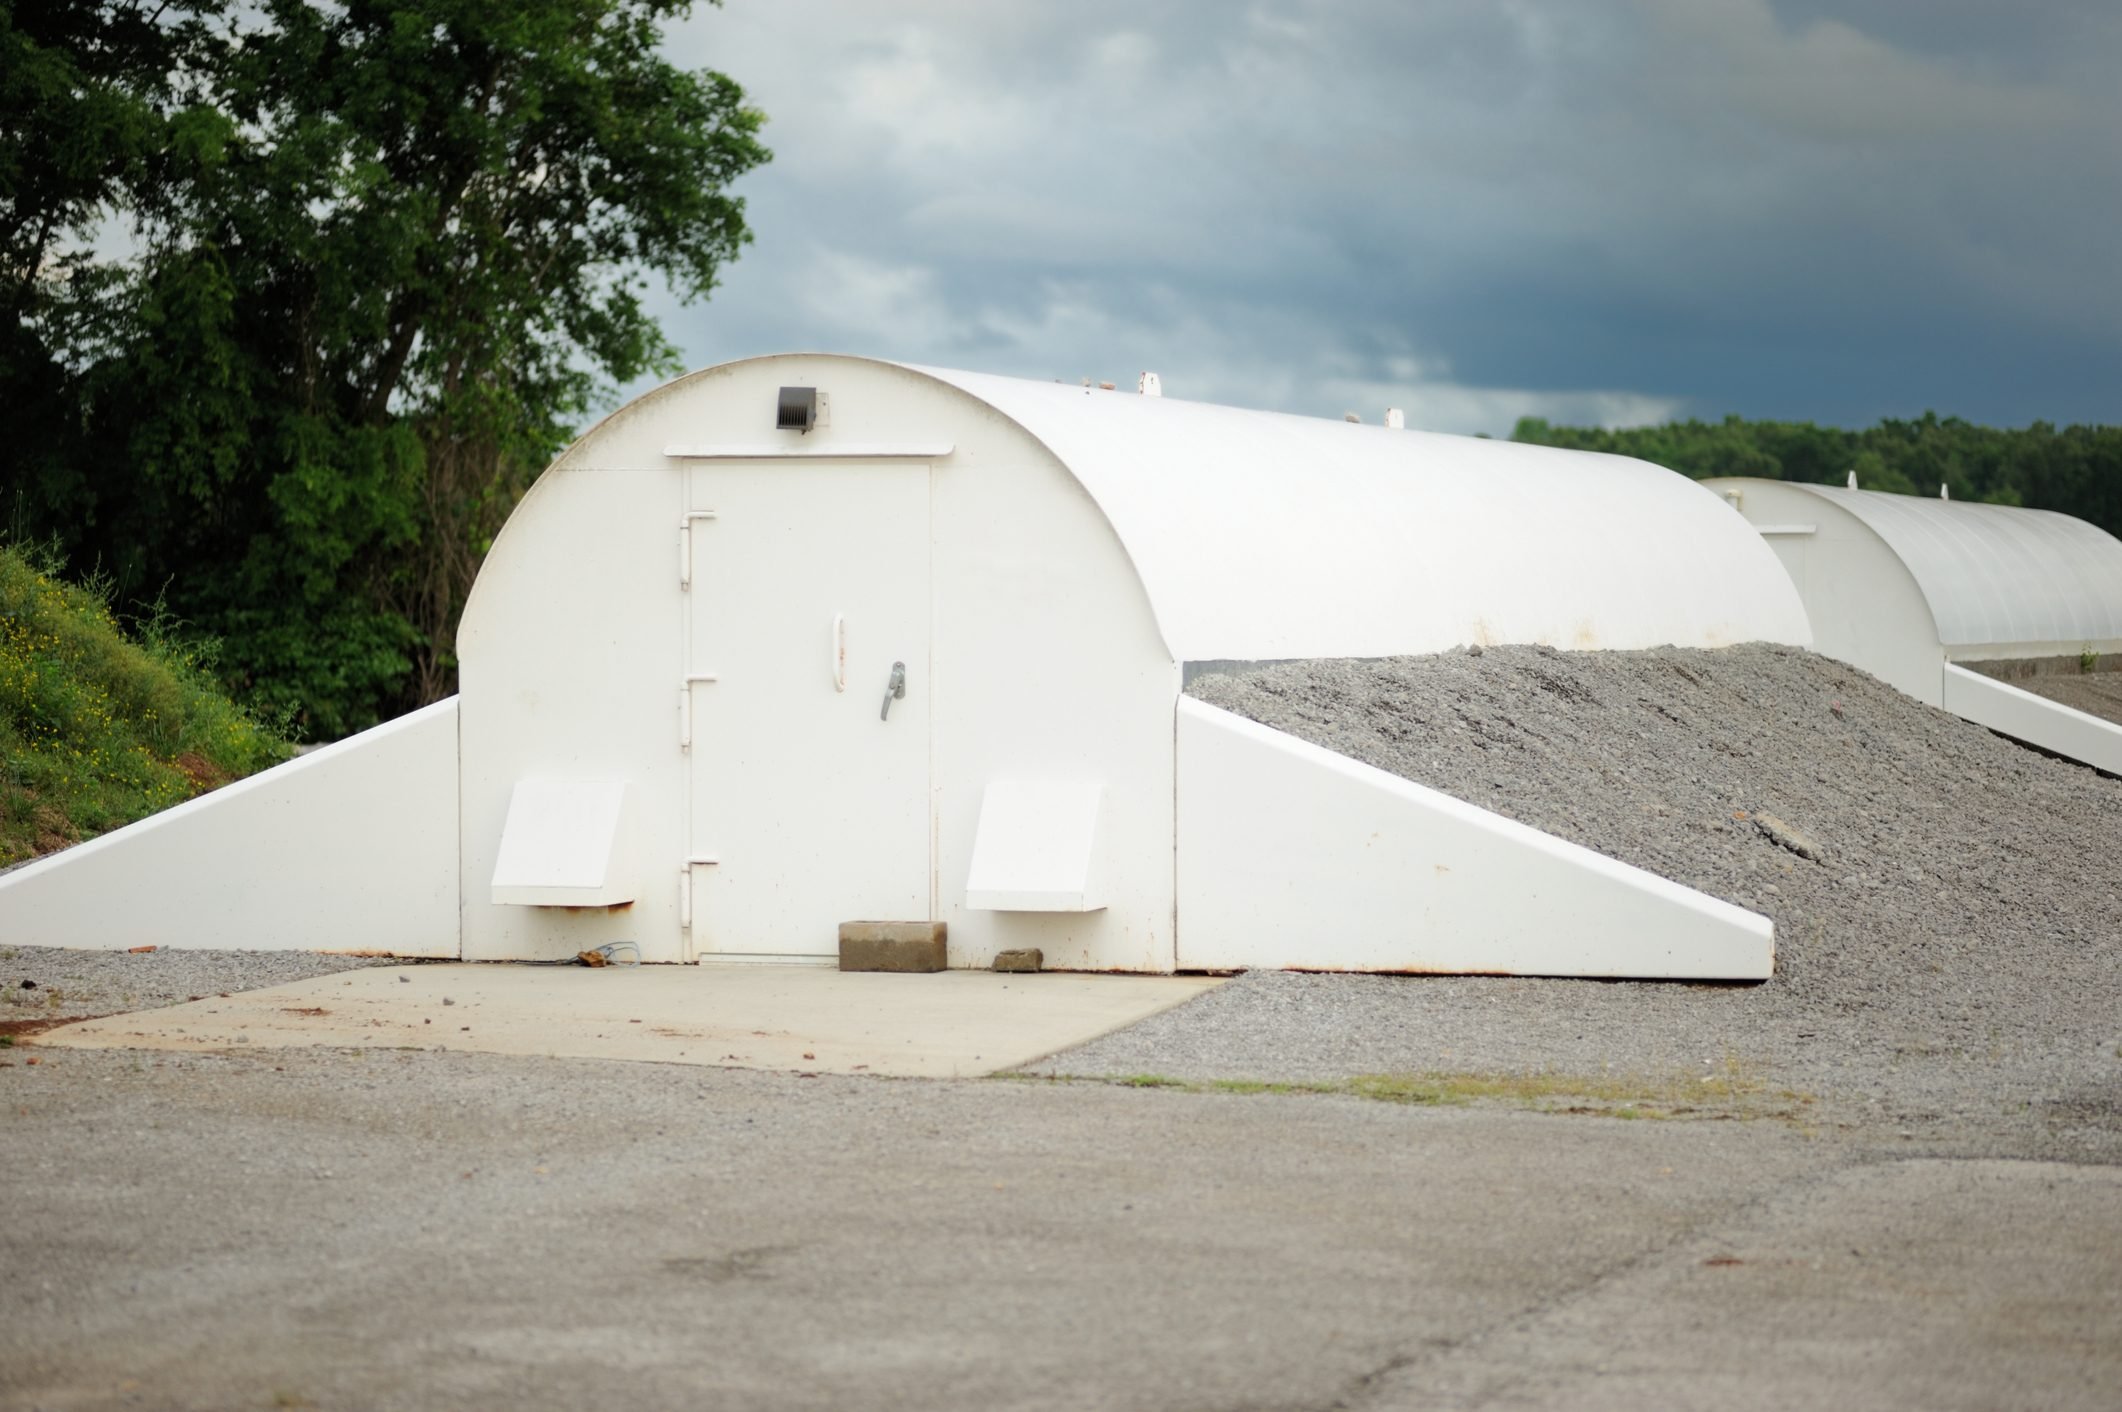 Here's How Much It Costs to Build a Tornado Shelter